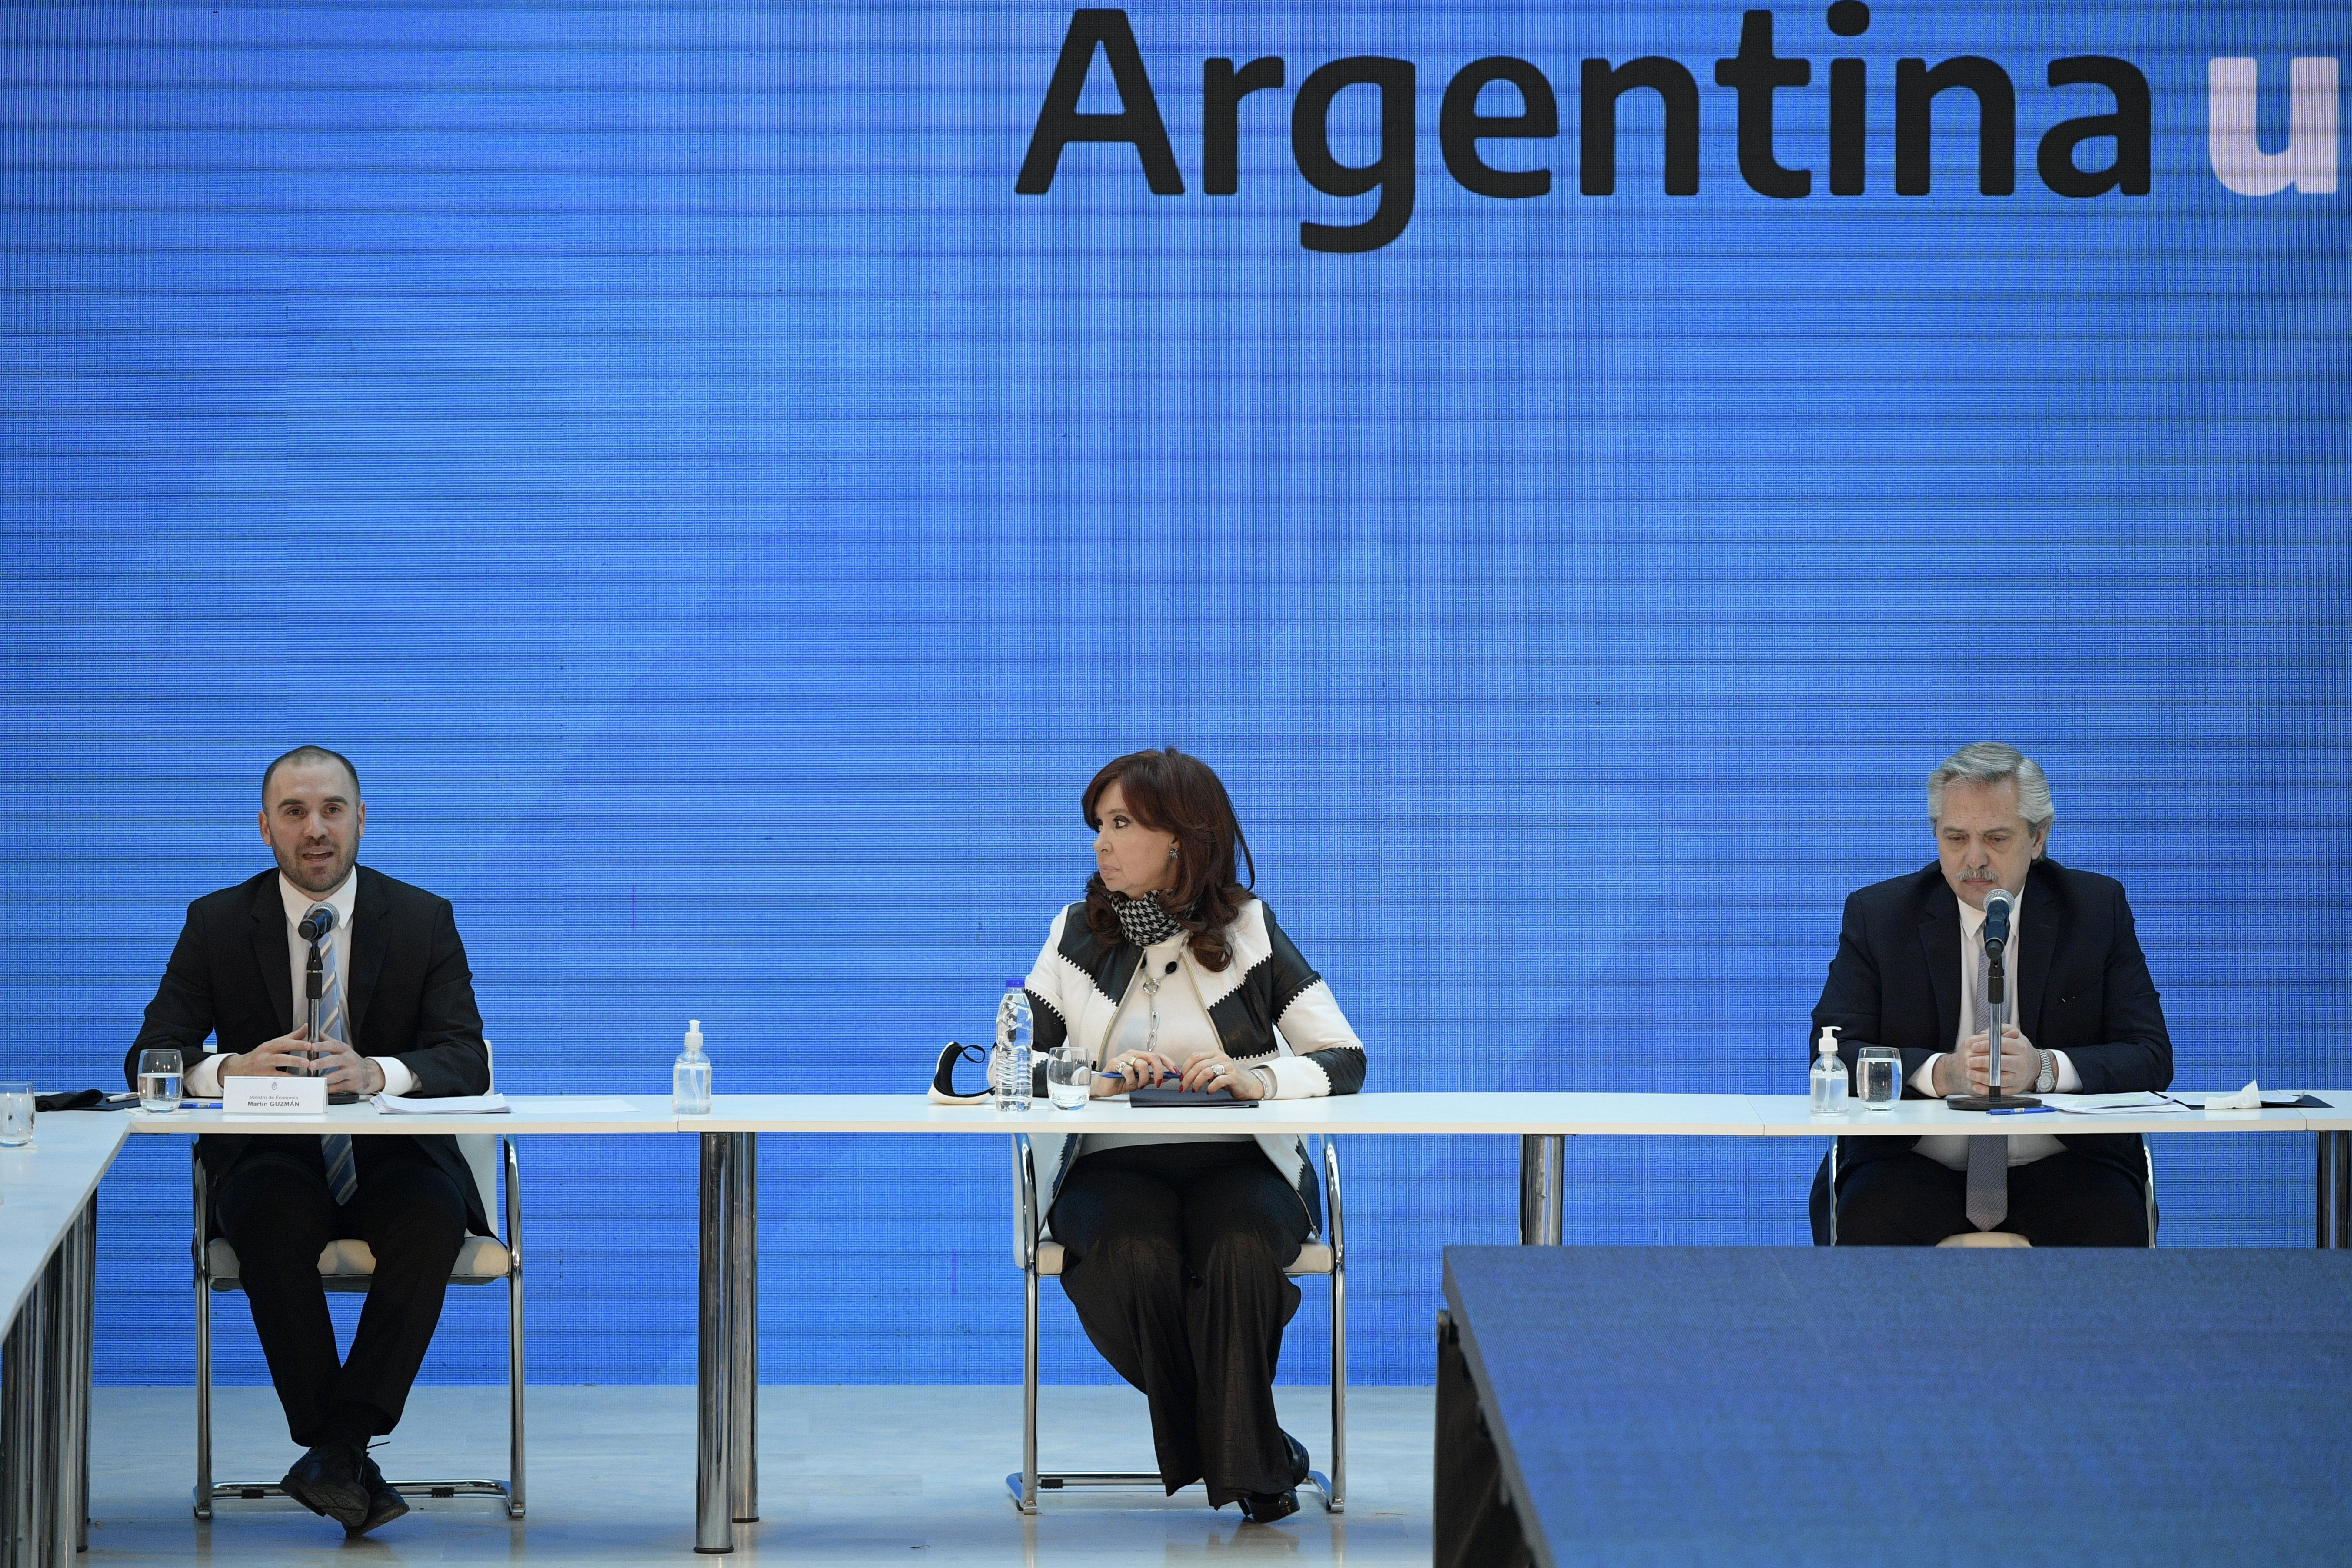 Argentina's President Alberto Fernandez (R), Vice President Cristina Fernandez de Kirchner and Economy Minister Martin Guzman attend a news conference to give details about the agreement with major private creditors to restructure Argentina's sovereign debt, at the Casa Rosada Presidential Palace, in Buenos Aires, Argentina August 31, 2020. Juan Mabromata/Pool via REUTERS